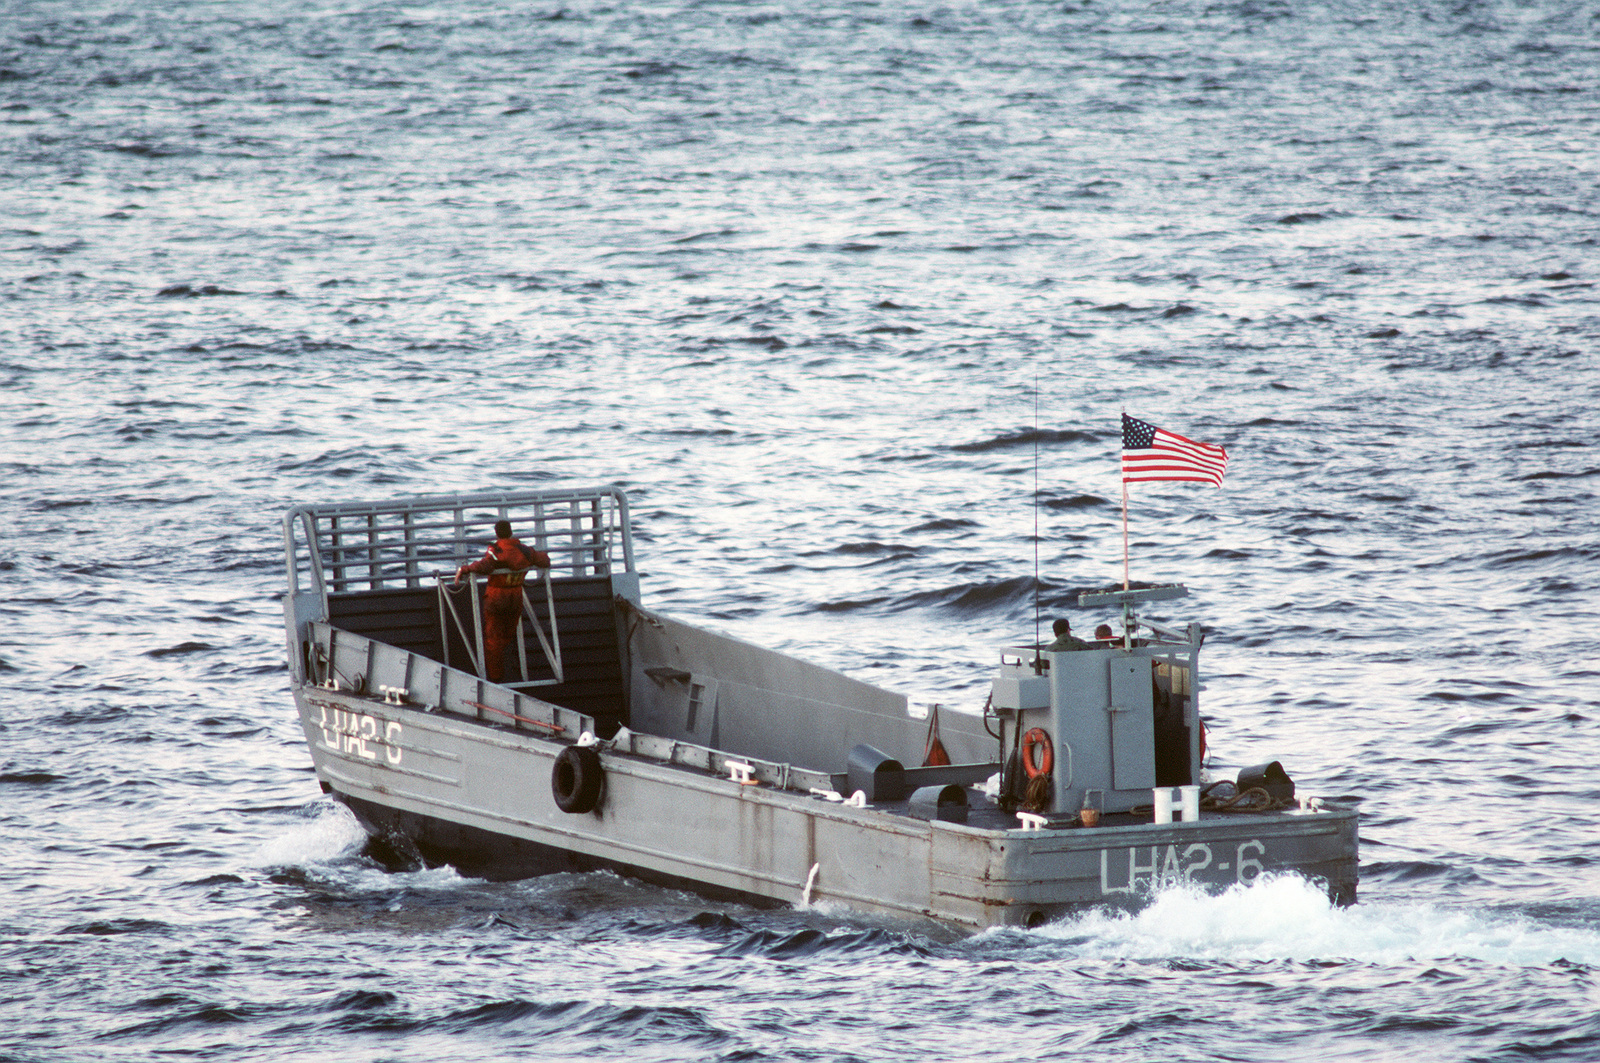 A port quarter view of an LCM 6 mechanized landing craft from the